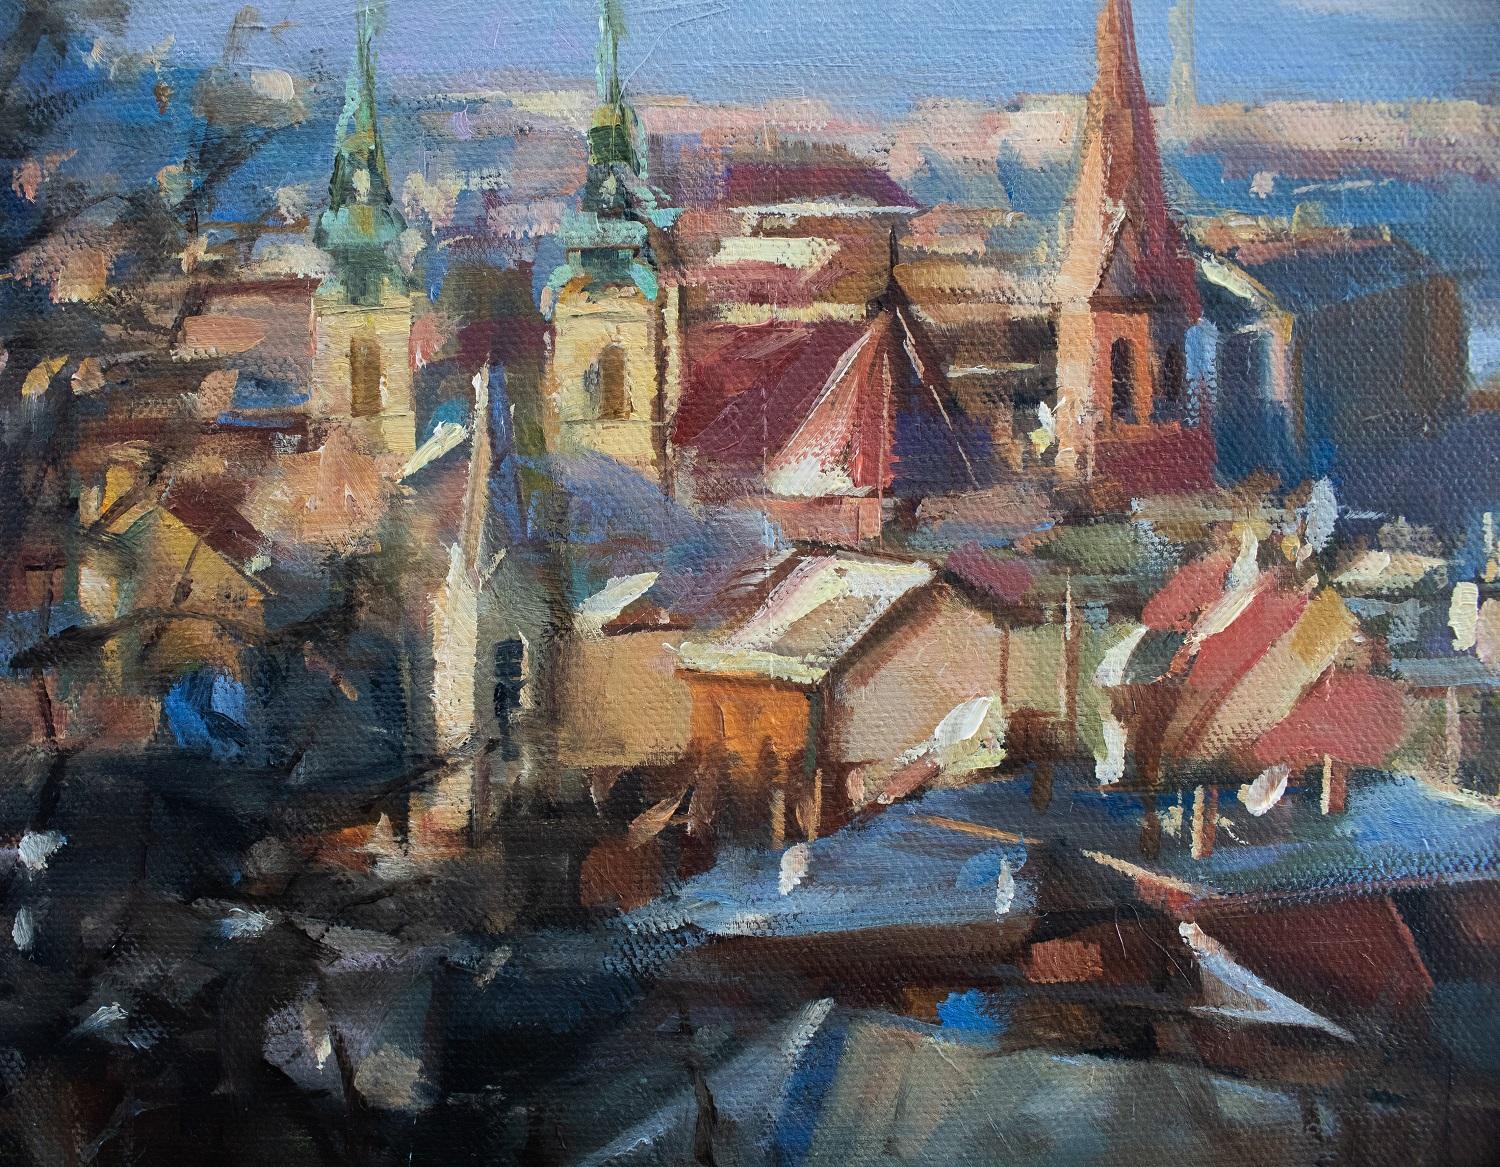 View of Budapest - Abstract Impressionist Art by Jonelle Summerfield